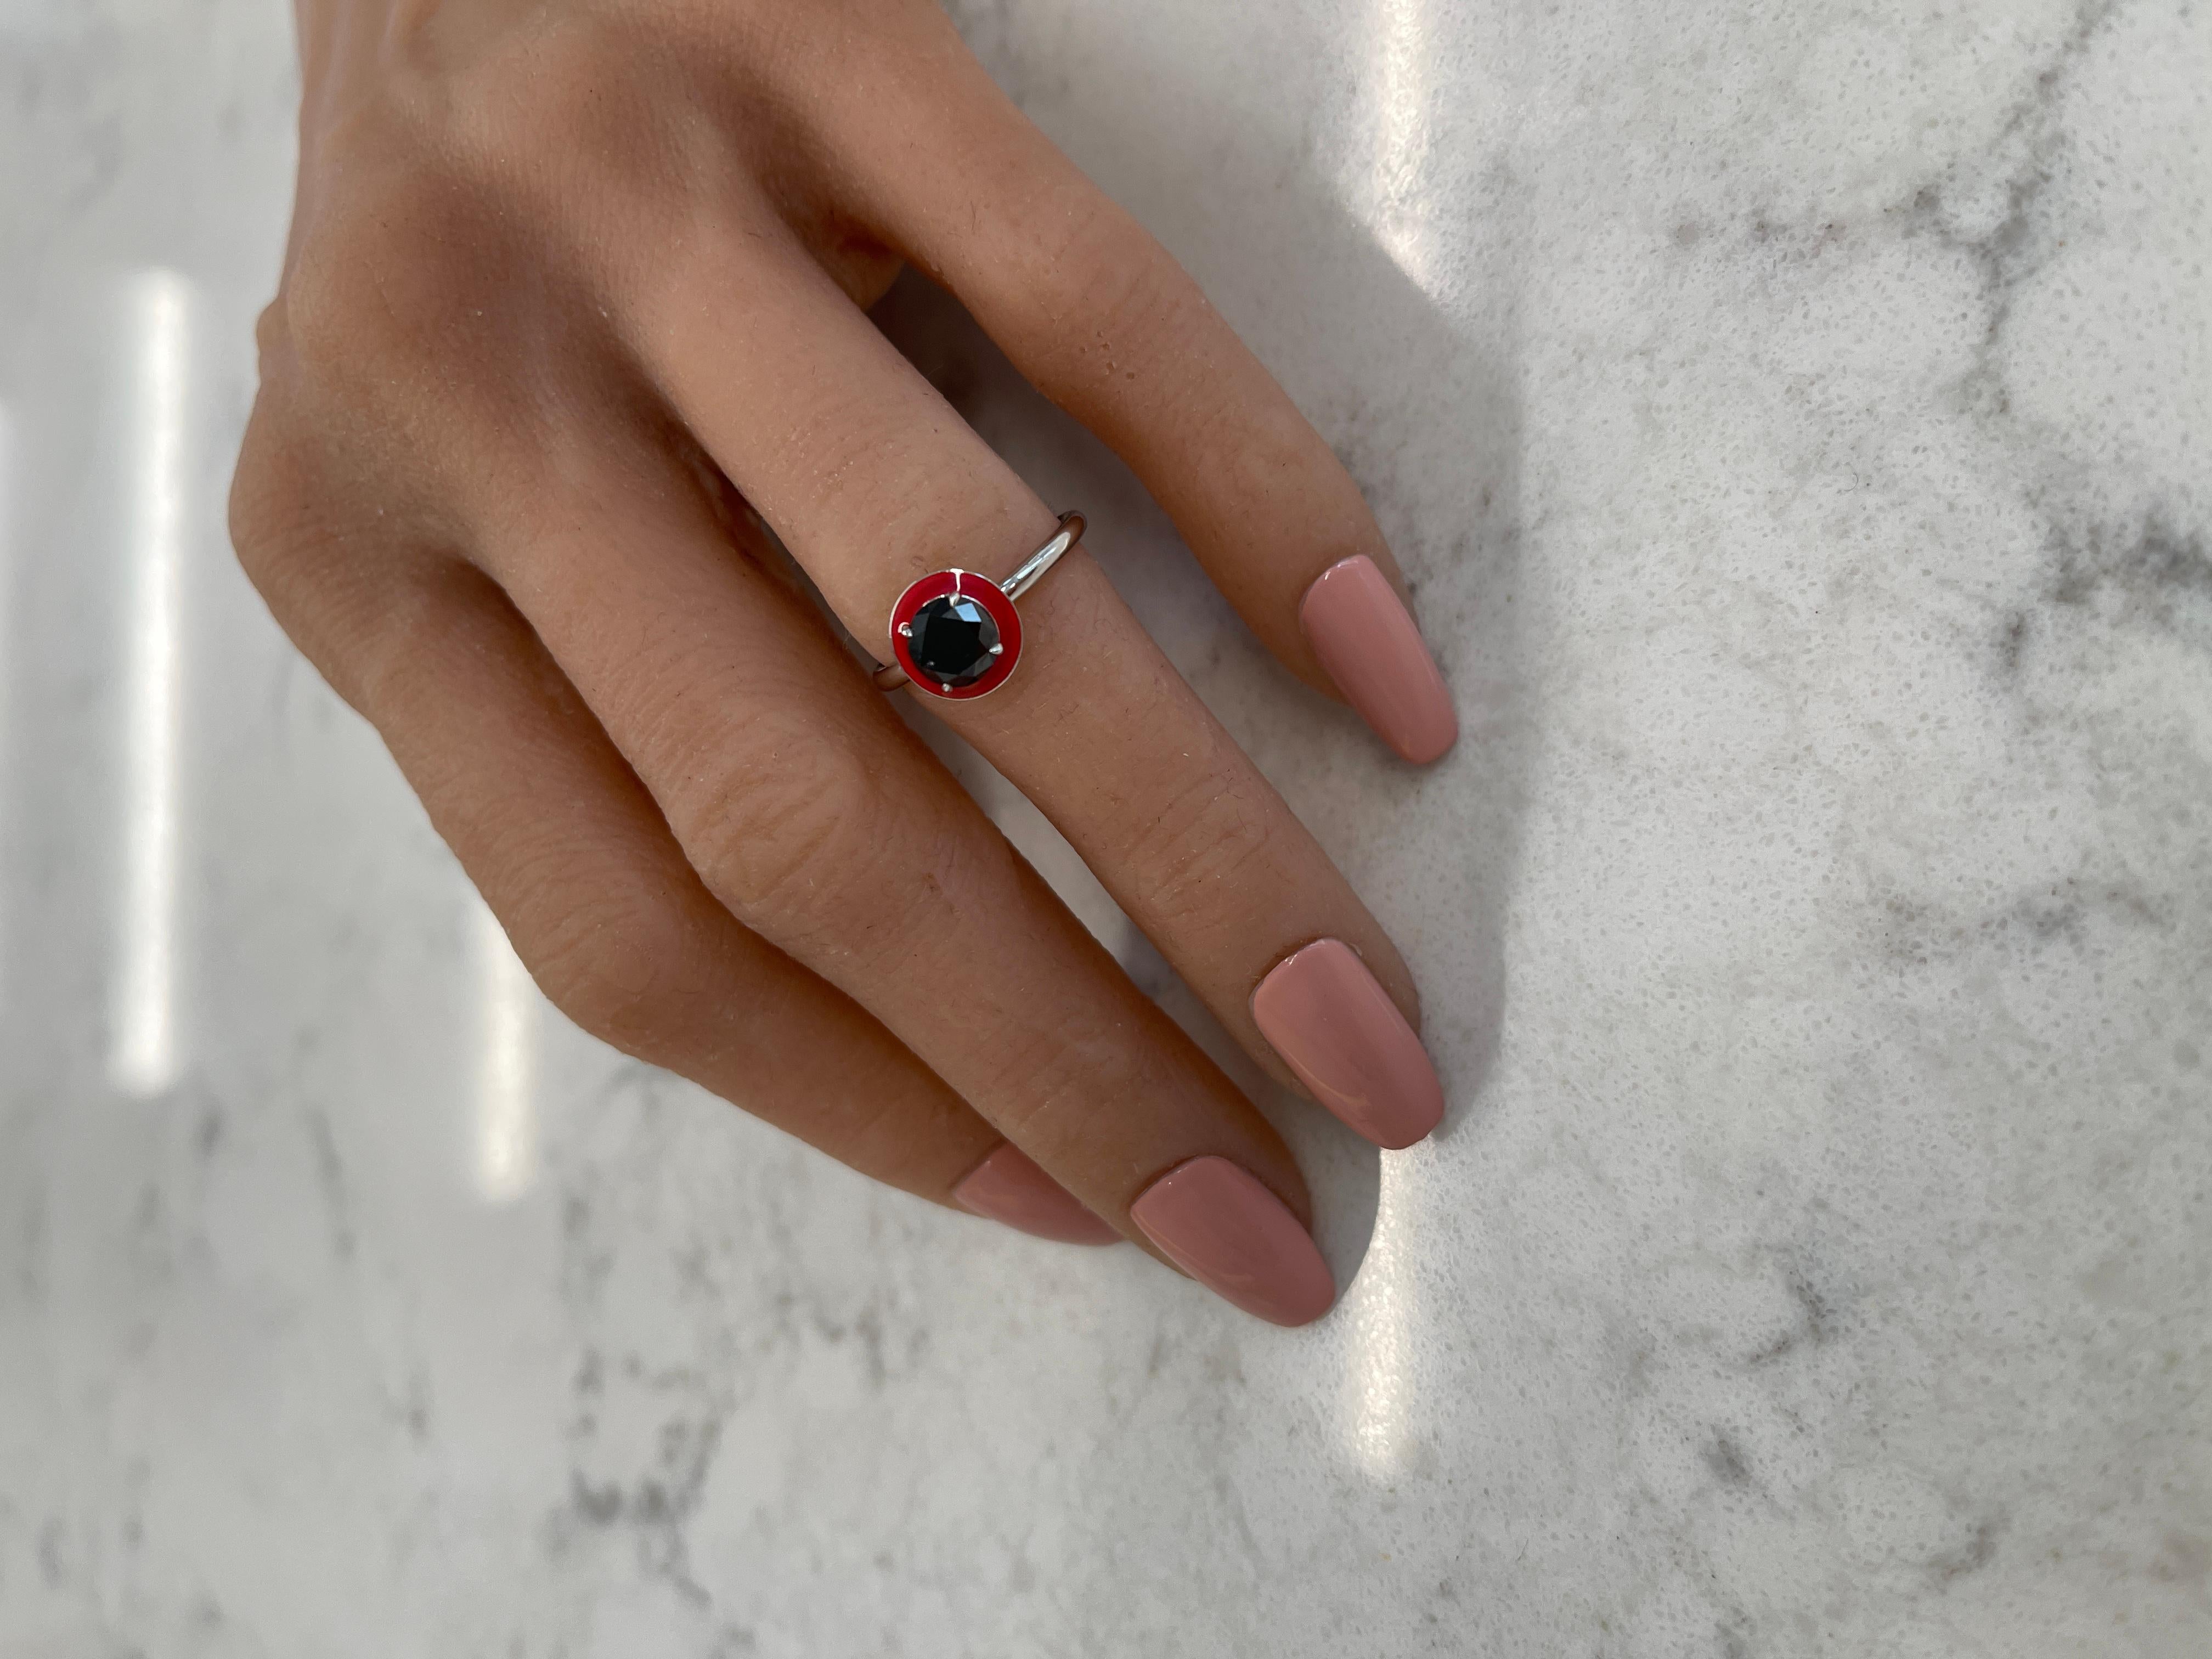 This intricate ring consists of a 1.00CT black diamond that has a red enamel halo surrounding it.